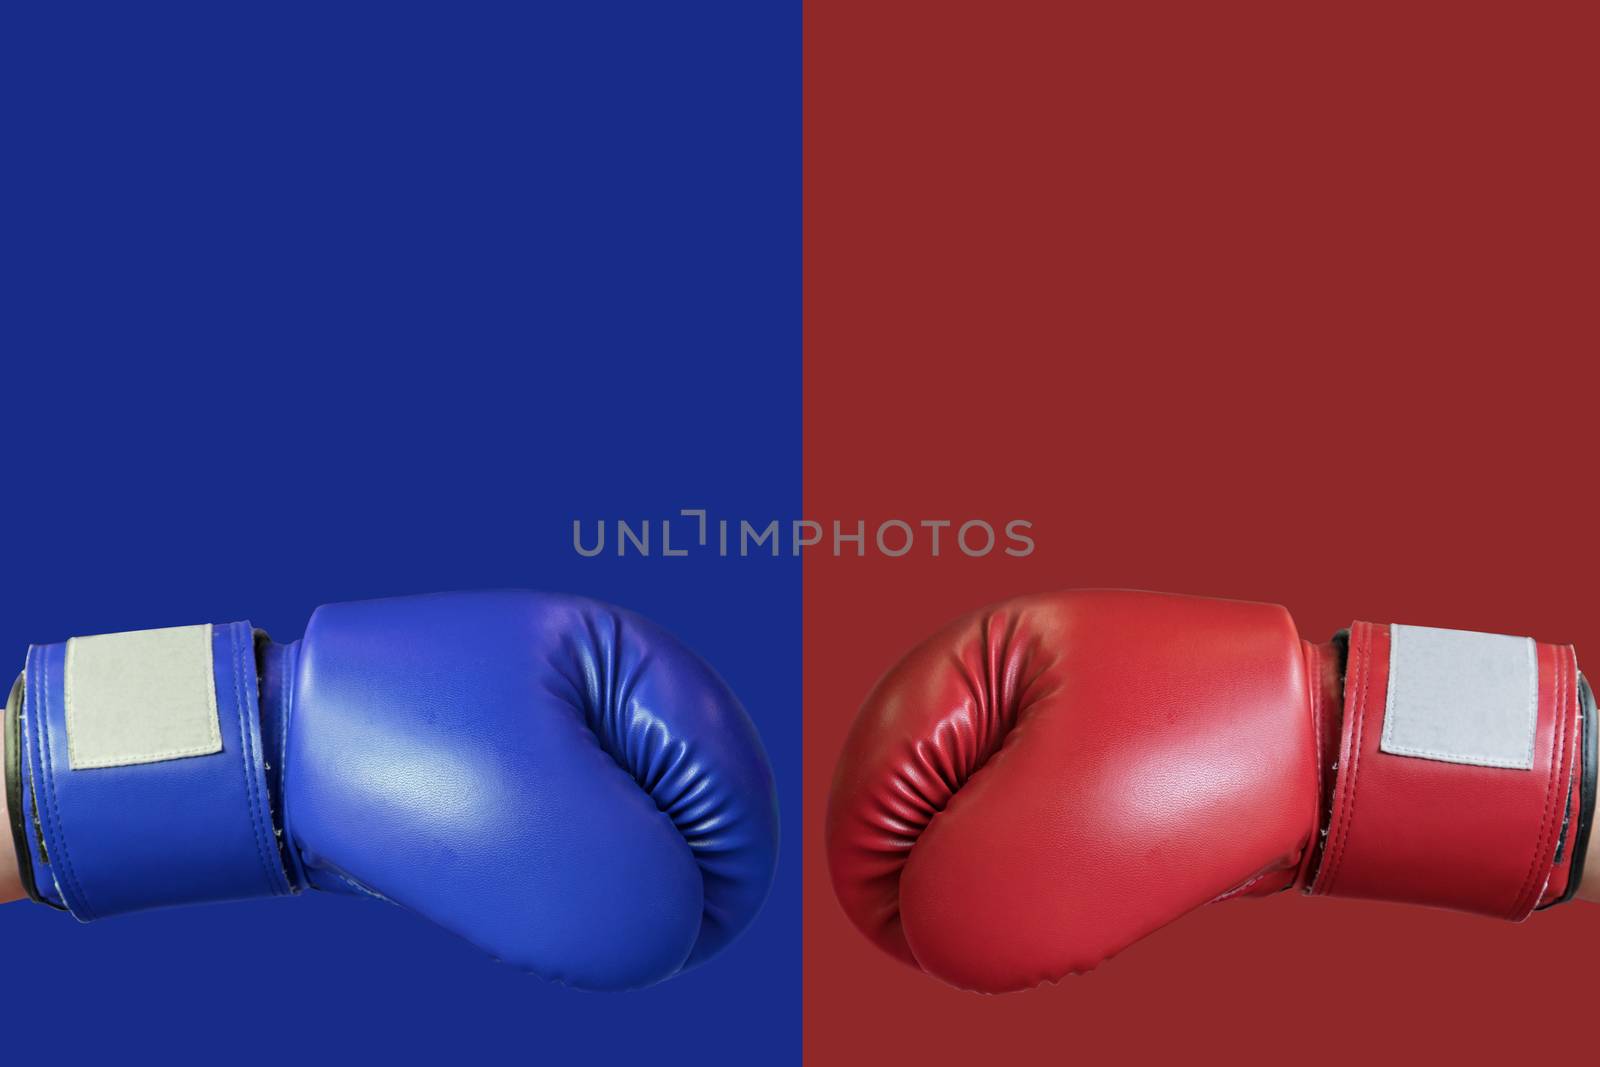 boxing glove in red and blue corner for fight and comparing the products